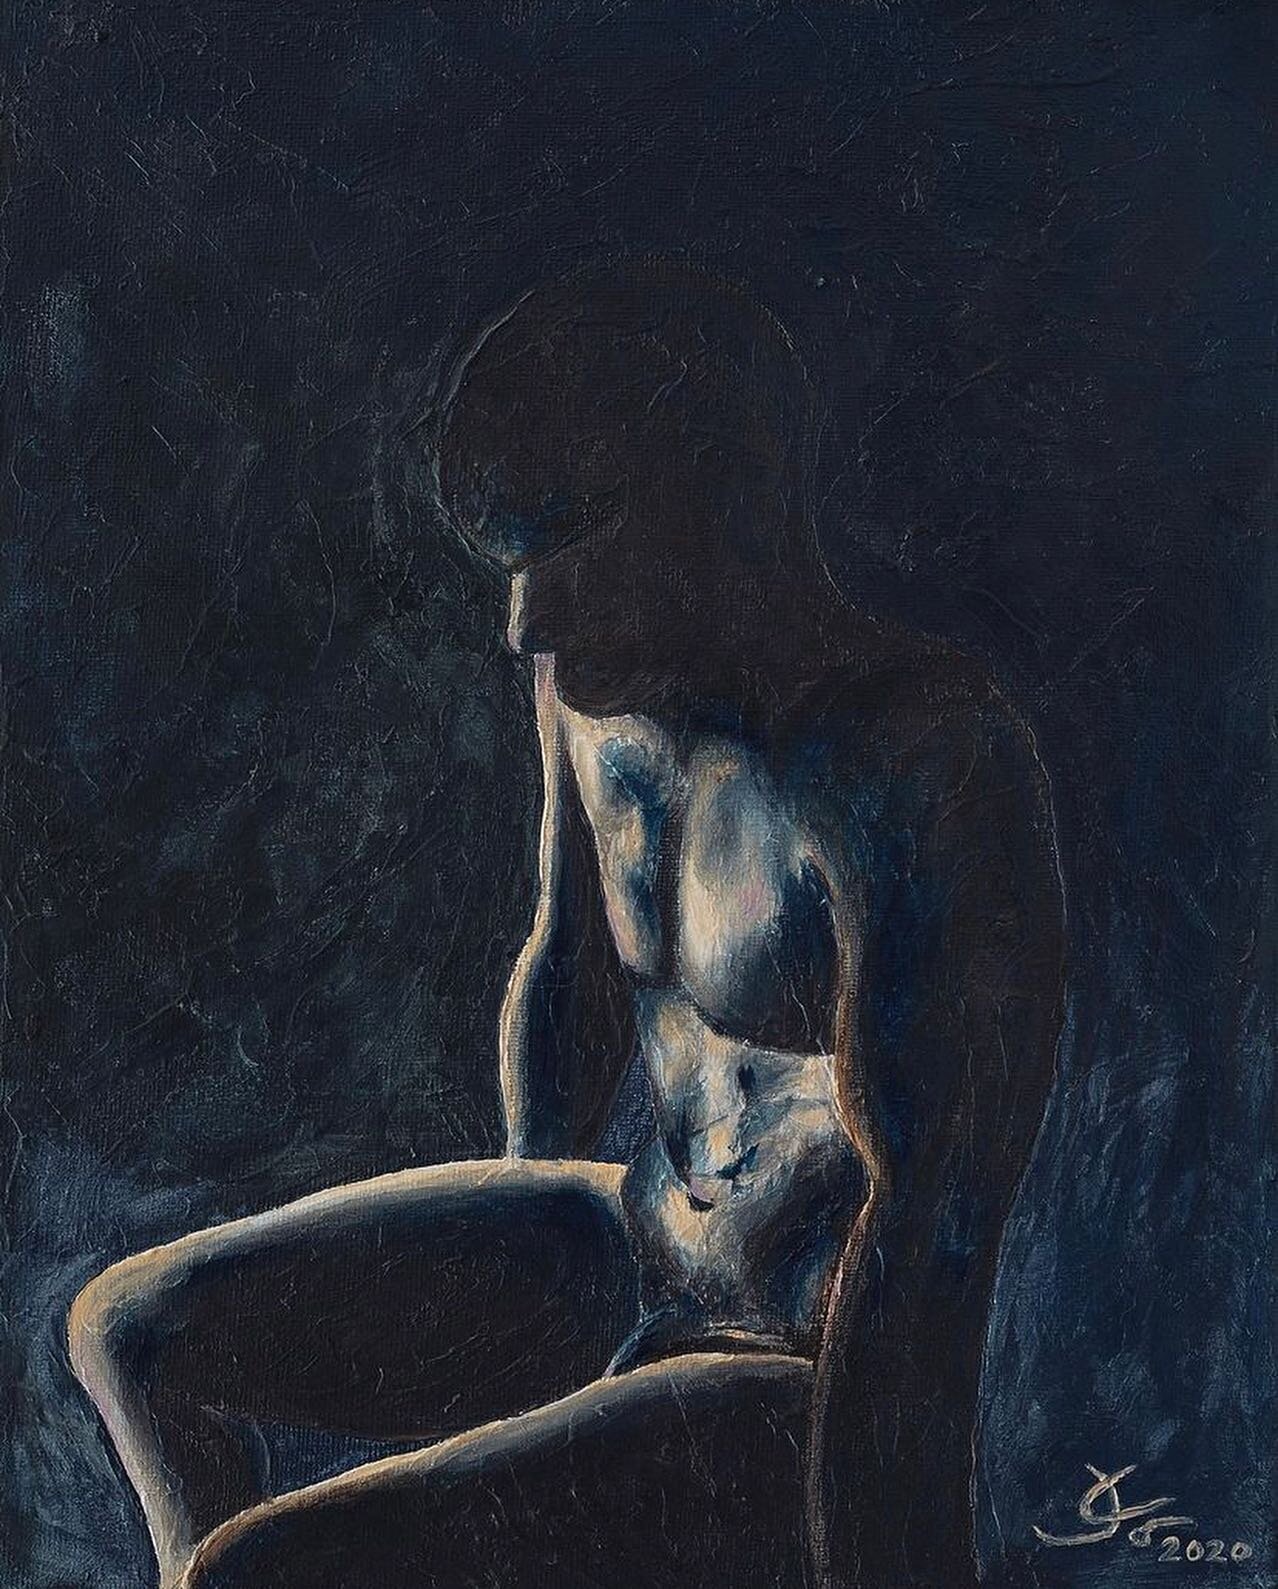 &quot;Within Me&quot; depicts a nude man sat in the shadows, alone with his own thoughts. All the emotions and feelings coming from within, surfacing to his skin. 

The textured background follows the shape of the body and continues throughout it, ma